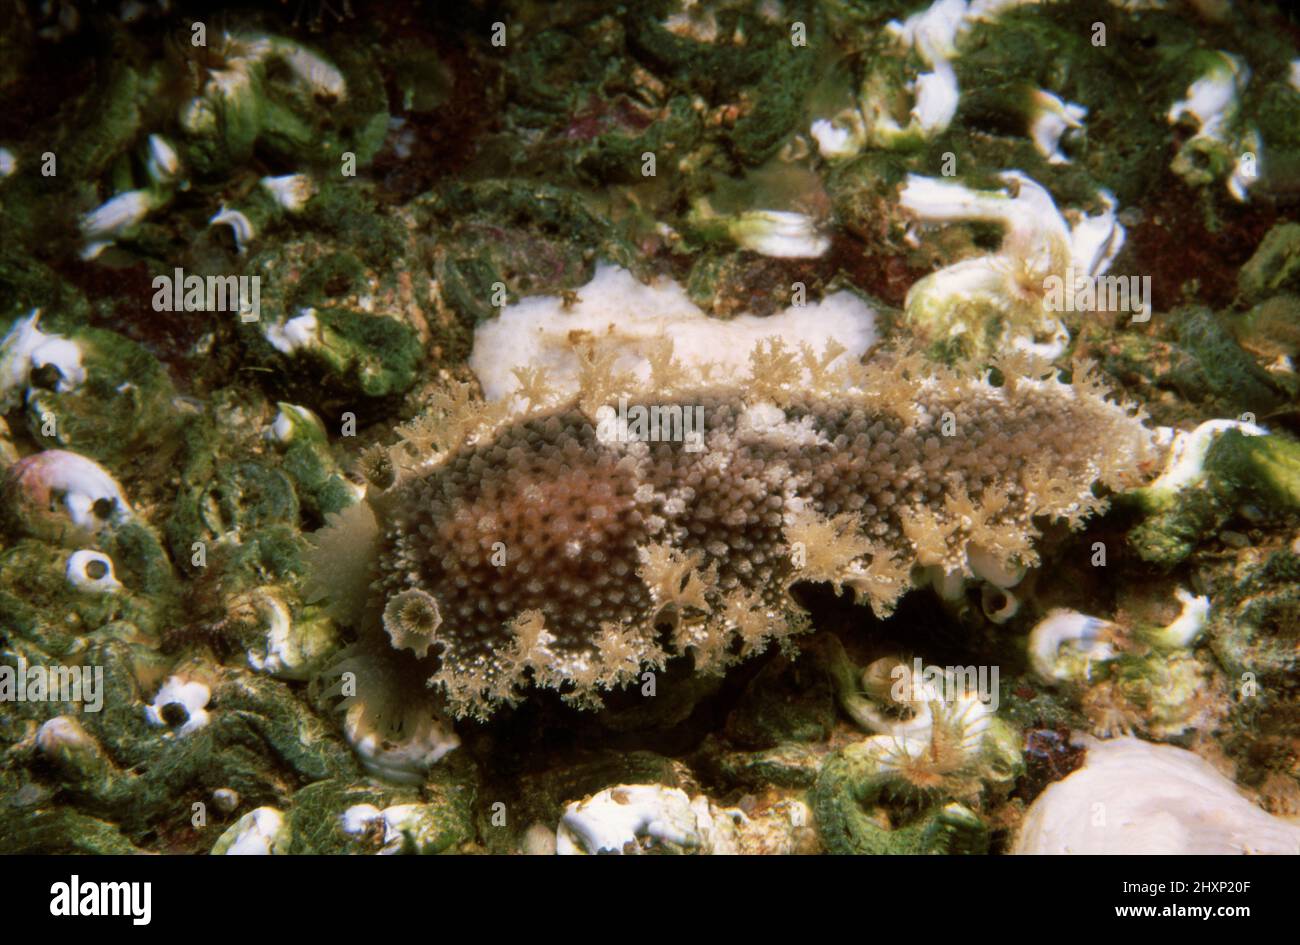 Nudibranch or sea slug (Tritonia hombergi) on a rocky substrate with lots of keel worms, UK. Stock Photo